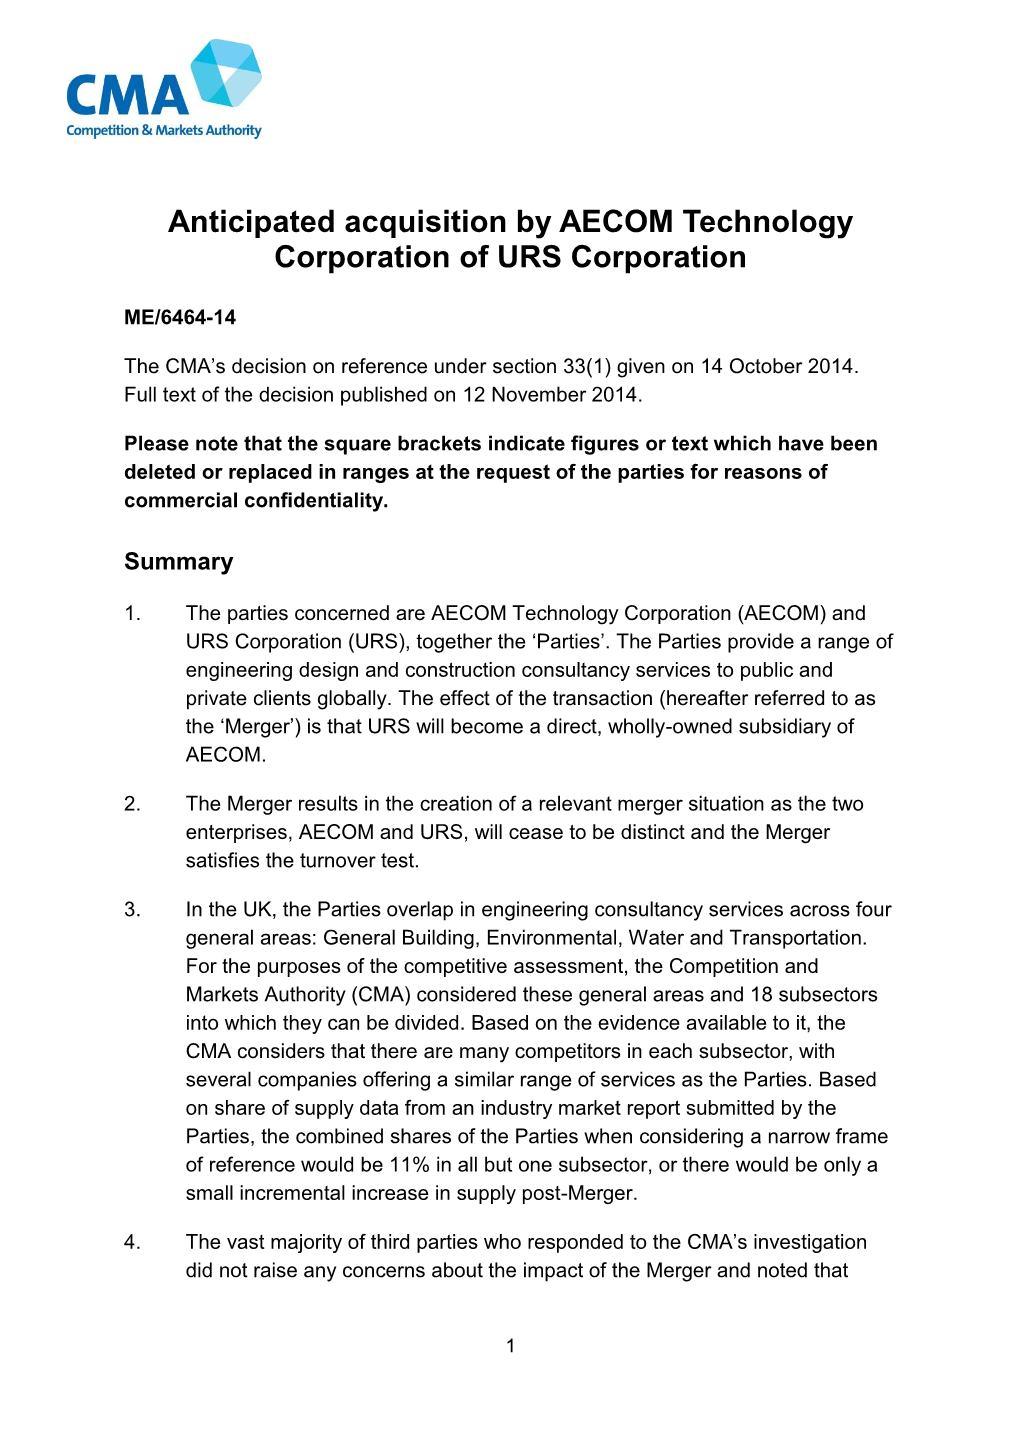 Anticipated Acquisition by AECOM Technology Corporation of URS Corporation